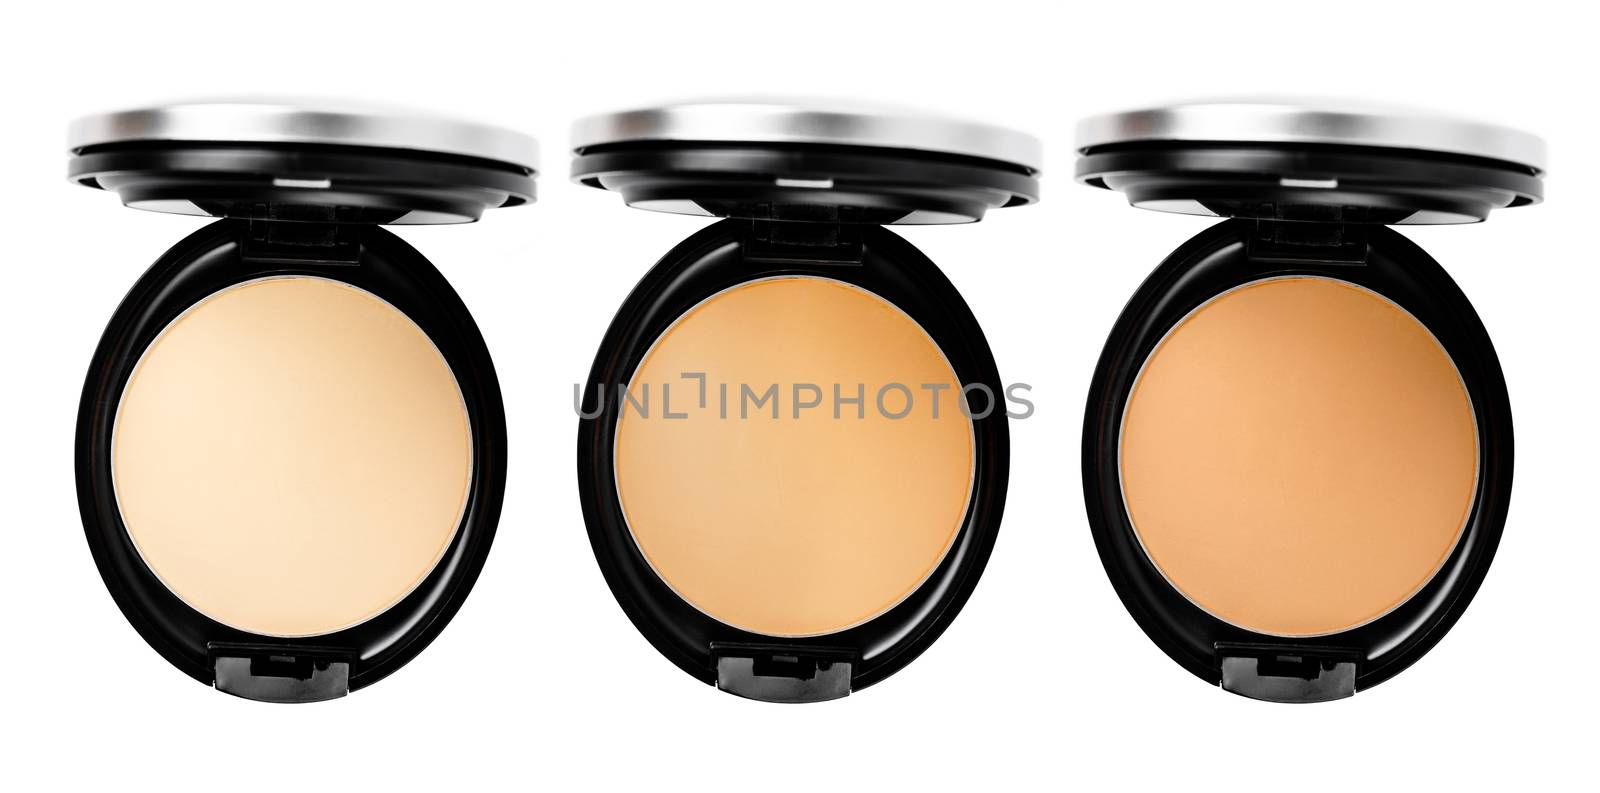 Collection of powder foundation makeup different shades compact on white background.